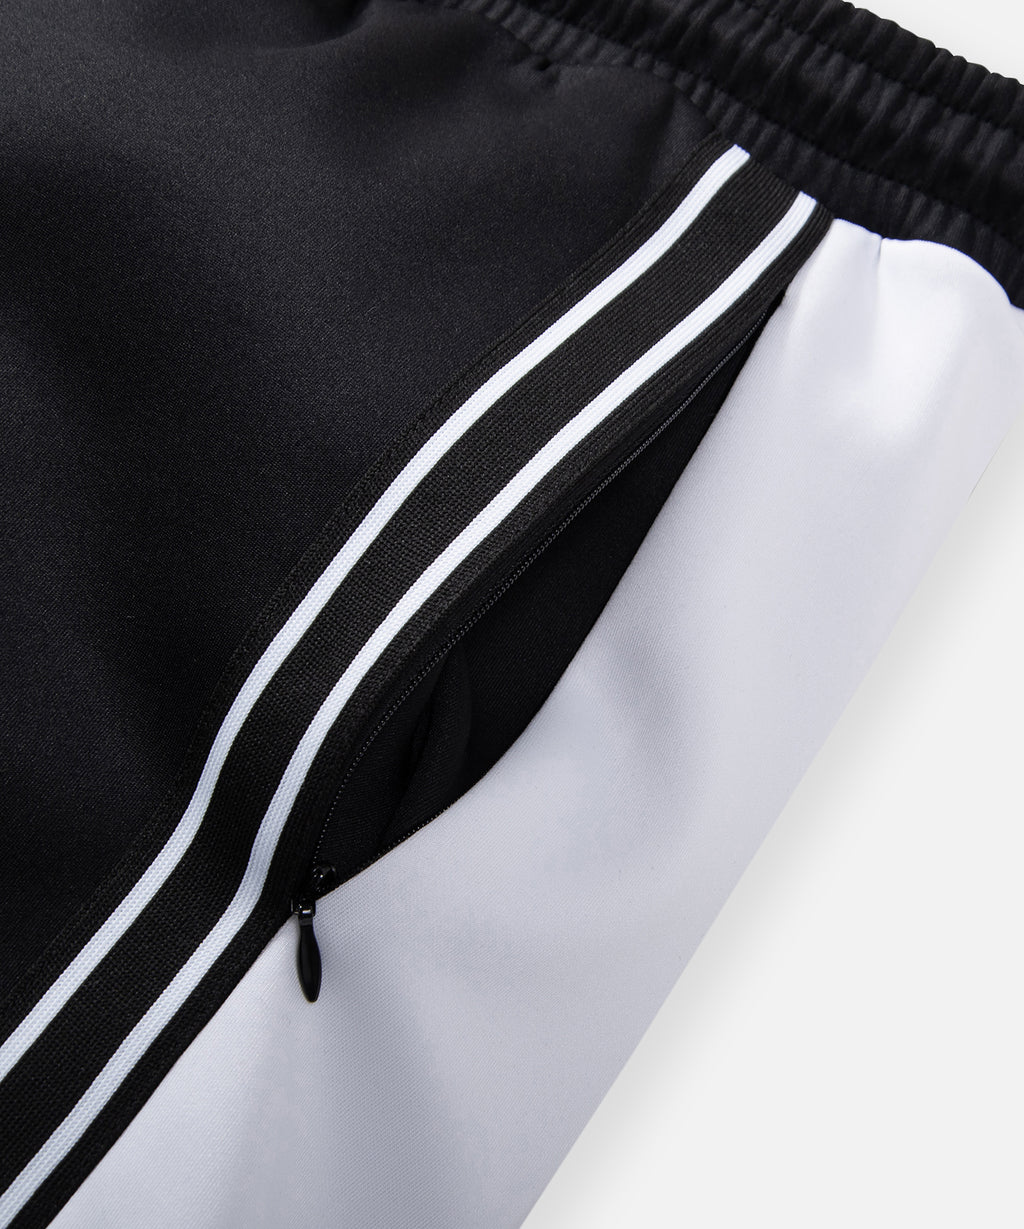  On-seam front pocket with hidden zipper on Paper Planes Basketball Short color Black.